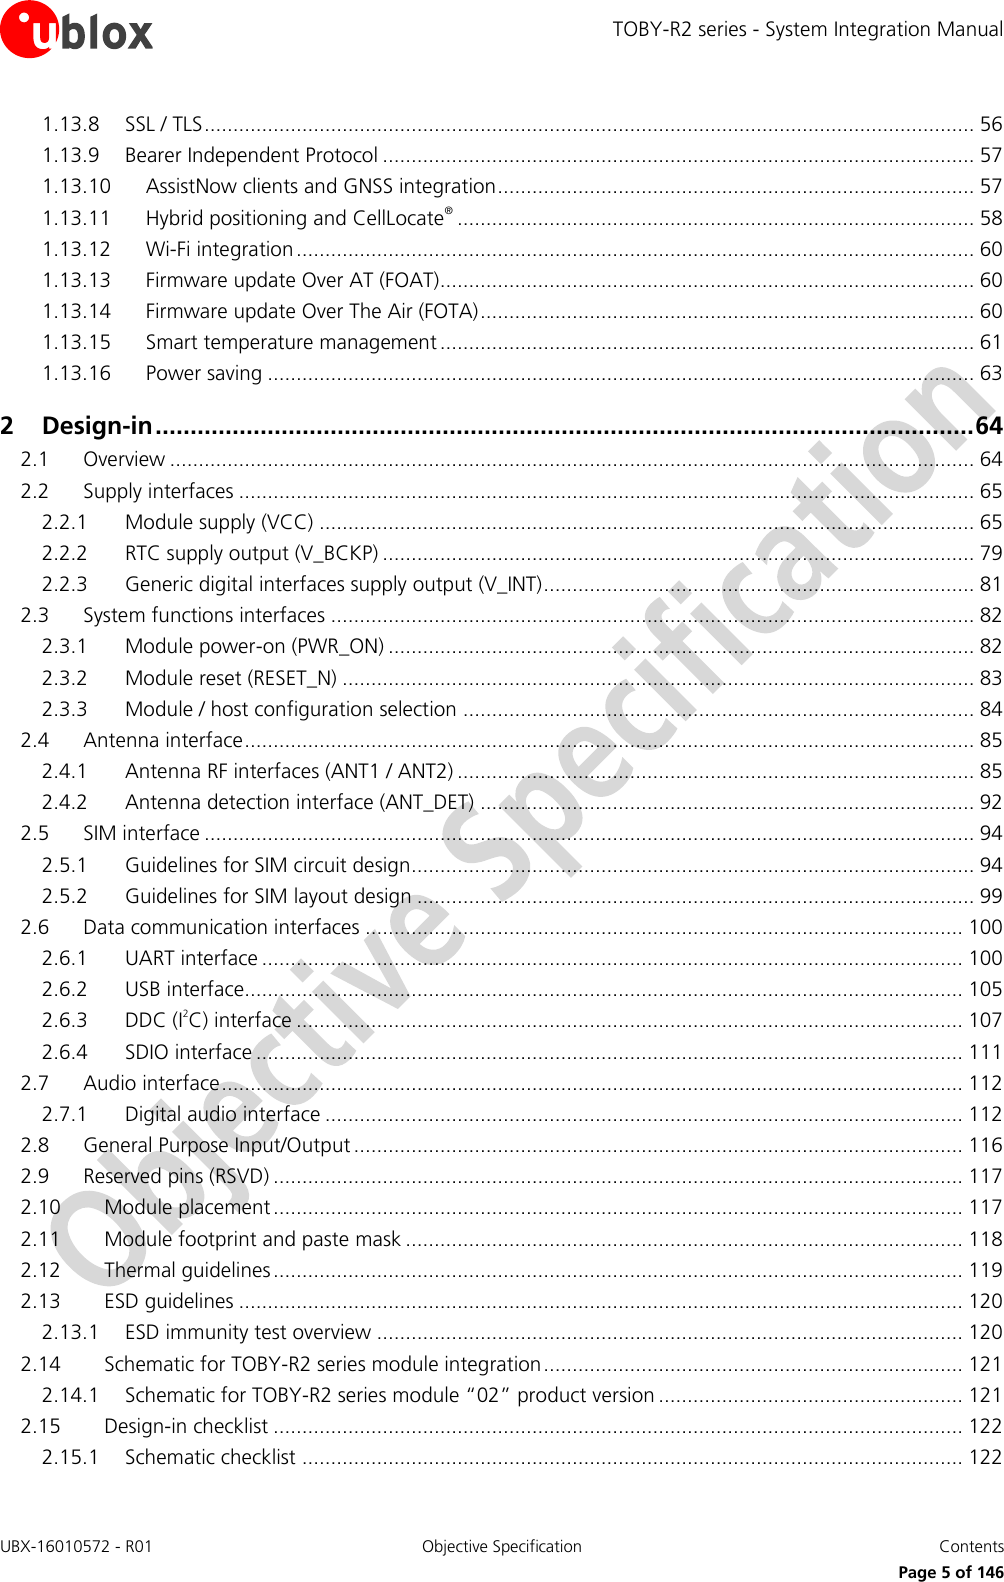 TOBY-R2 series - System Integration Manual UBX-16010572 - R01  Objective Specification  Contents     Page 5 of 146 1.13.8 SSL / TLS ...................................................................................................................................... 56 1.13.9 Bearer Independent Protocol ....................................................................................................... 57 1.13.10 AssistNow clients and GNSS integration ................................................................................... 57 1.13.11 Hybrid positioning and CellLocate® .......................................................................................... 58 1.13.12 Wi-Fi integration ...................................................................................................................... 60 1.13.13 Firmware update Over AT (FOAT)............................................................................................. 60 1.13.14 Firmware update Over The Air (FOTA) ...................................................................................... 60 1.13.15 Smart temperature management ............................................................................................. 61 1.13.16 Power saving ........................................................................................................................... 63 2 Design-in ..................................................................................................................... 64 2.1 Overview ............................................................................................................................................ 64 2.2 Supply interfaces ................................................................................................................................ 65 2.2.1 Module supply (VCC) .................................................................................................................. 65 2.2.2 RTC supply output (V_BCKP) ....................................................................................................... 79 2.2.3 Generic digital interfaces supply output (V_INT) ........................................................................... 81 2.3 System functions interfaces ................................................................................................................ 82 2.3.1 Module power-on (PWR_ON) ...................................................................................................... 82 2.3.2 Module reset (RESET_N) .............................................................................................................. 83 2.3.3 Module / host configuration selection ......................................................................................... 84 2.4 Antenna interface ............................................................................................................................... 85 2.4.1 Antenna RF interfaces (ANT1 / ANT2) .......................................................................................... 85 2.4.2 Antenna detection interface (ANT_DET) ...................................................................................... 92 2.5 SIM interface ...................................................................................................................................... 94 2.5.1 Guidelines for SIM circuit design.................................................................................................. 94 2.5.2 Guidelines for SIM layout design ................................................................................................. 99 2.6 Data communication interfaces ........................................................................................................ 100 2.6.1 UART interface .......................................................................................................................... 100 2.6.2 USB interface............................................................................................................................. 105 2.6.3 DDC (I2C) interface .................................................................................................................... 107 2.6.4 SDIO interface ........................................................................................................................... 111 2.7 Audio interface ................................................................................................................................. 112 2.7.1 Digital audio interface ............................................................................................................... 112 2.8 General Purpose Input/Output .......................................................................................................... 116 2.9 Reserved pins (RSVD) ........................................................................................................................ 117 2.10 Module placement ........................................................................................................................ 117 2.11 Module footprint and paste mask ................................................................................................. 118 2.12 Thermal guidelines ........................................................................................................................ 119 2.13 ESD guidelines .............................................................................................................................. 120 2.13.1 ESD immunity test overview ...................................................................................................... 120 2.14 Schematic for TOBY-R2 series module integration ......................................................................... 121 2.14.1 Schematic for TOBY-R2 series module “02” product version ..................................................... 121 2.15 Design-in checklist ........................................................................................................................ 122 2.15.1 Schematic checklist ................................................................................................................... 122 